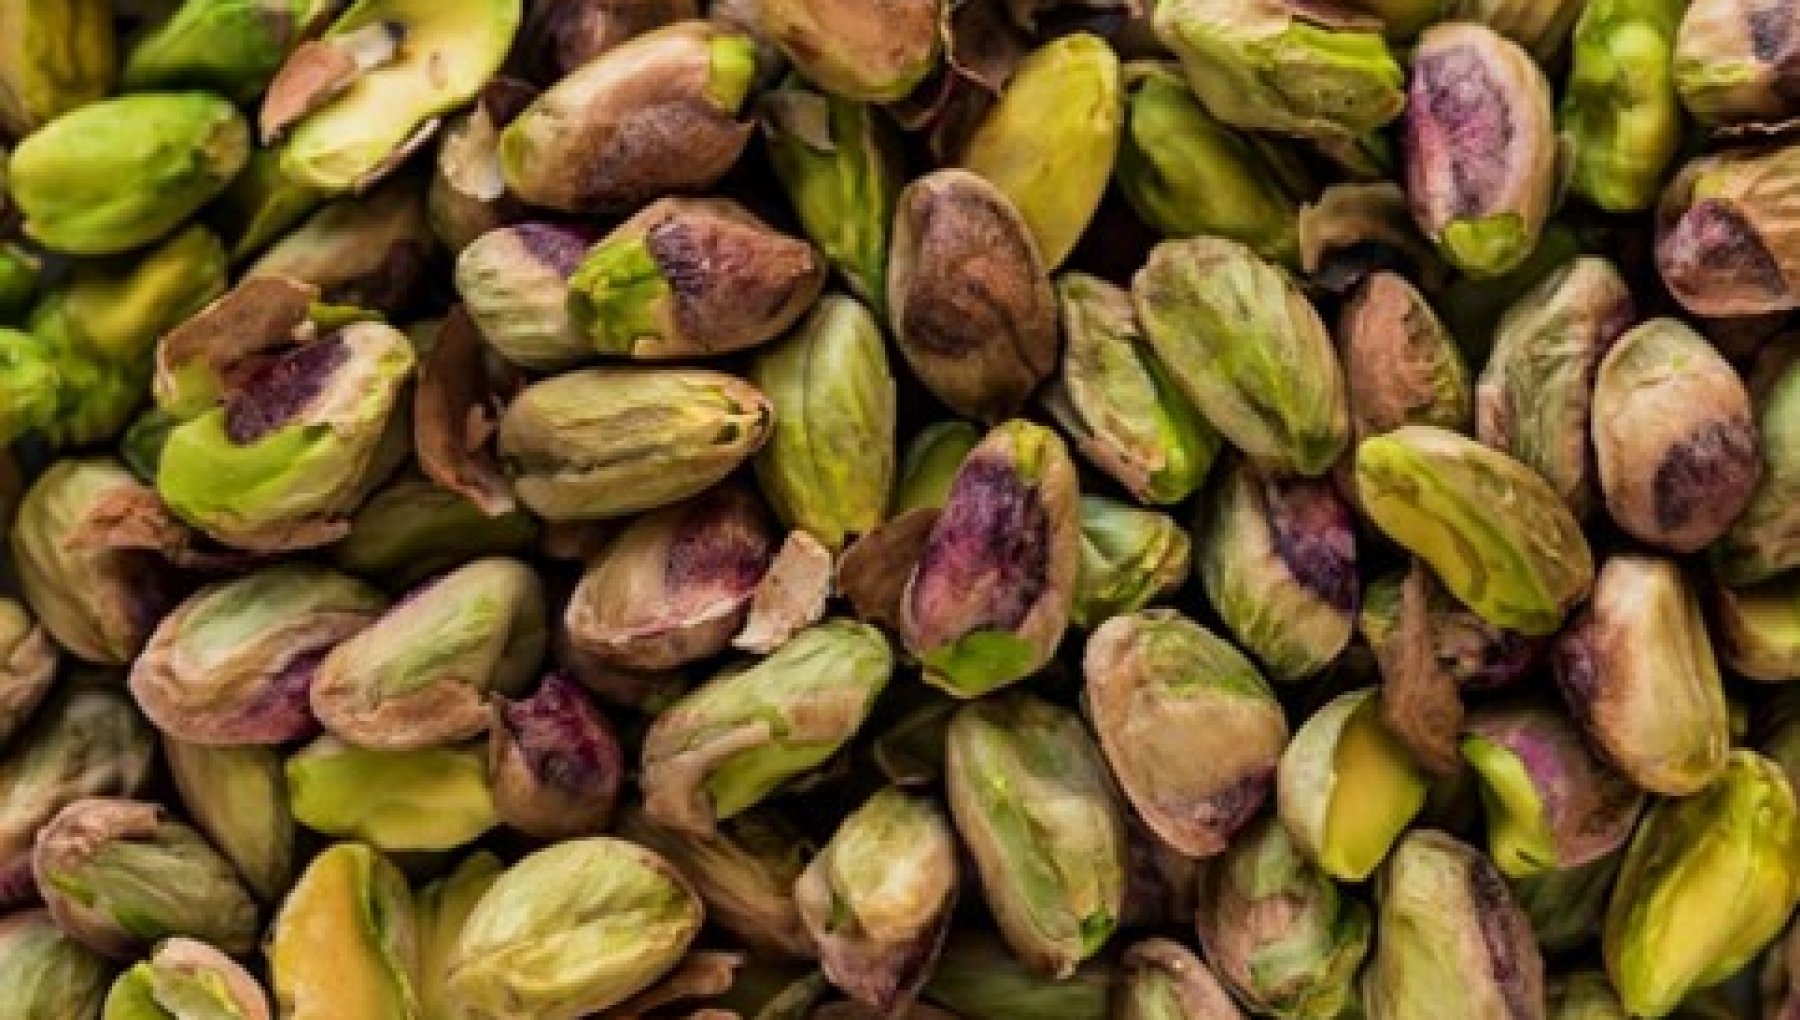 Pistachio plant: all about growing